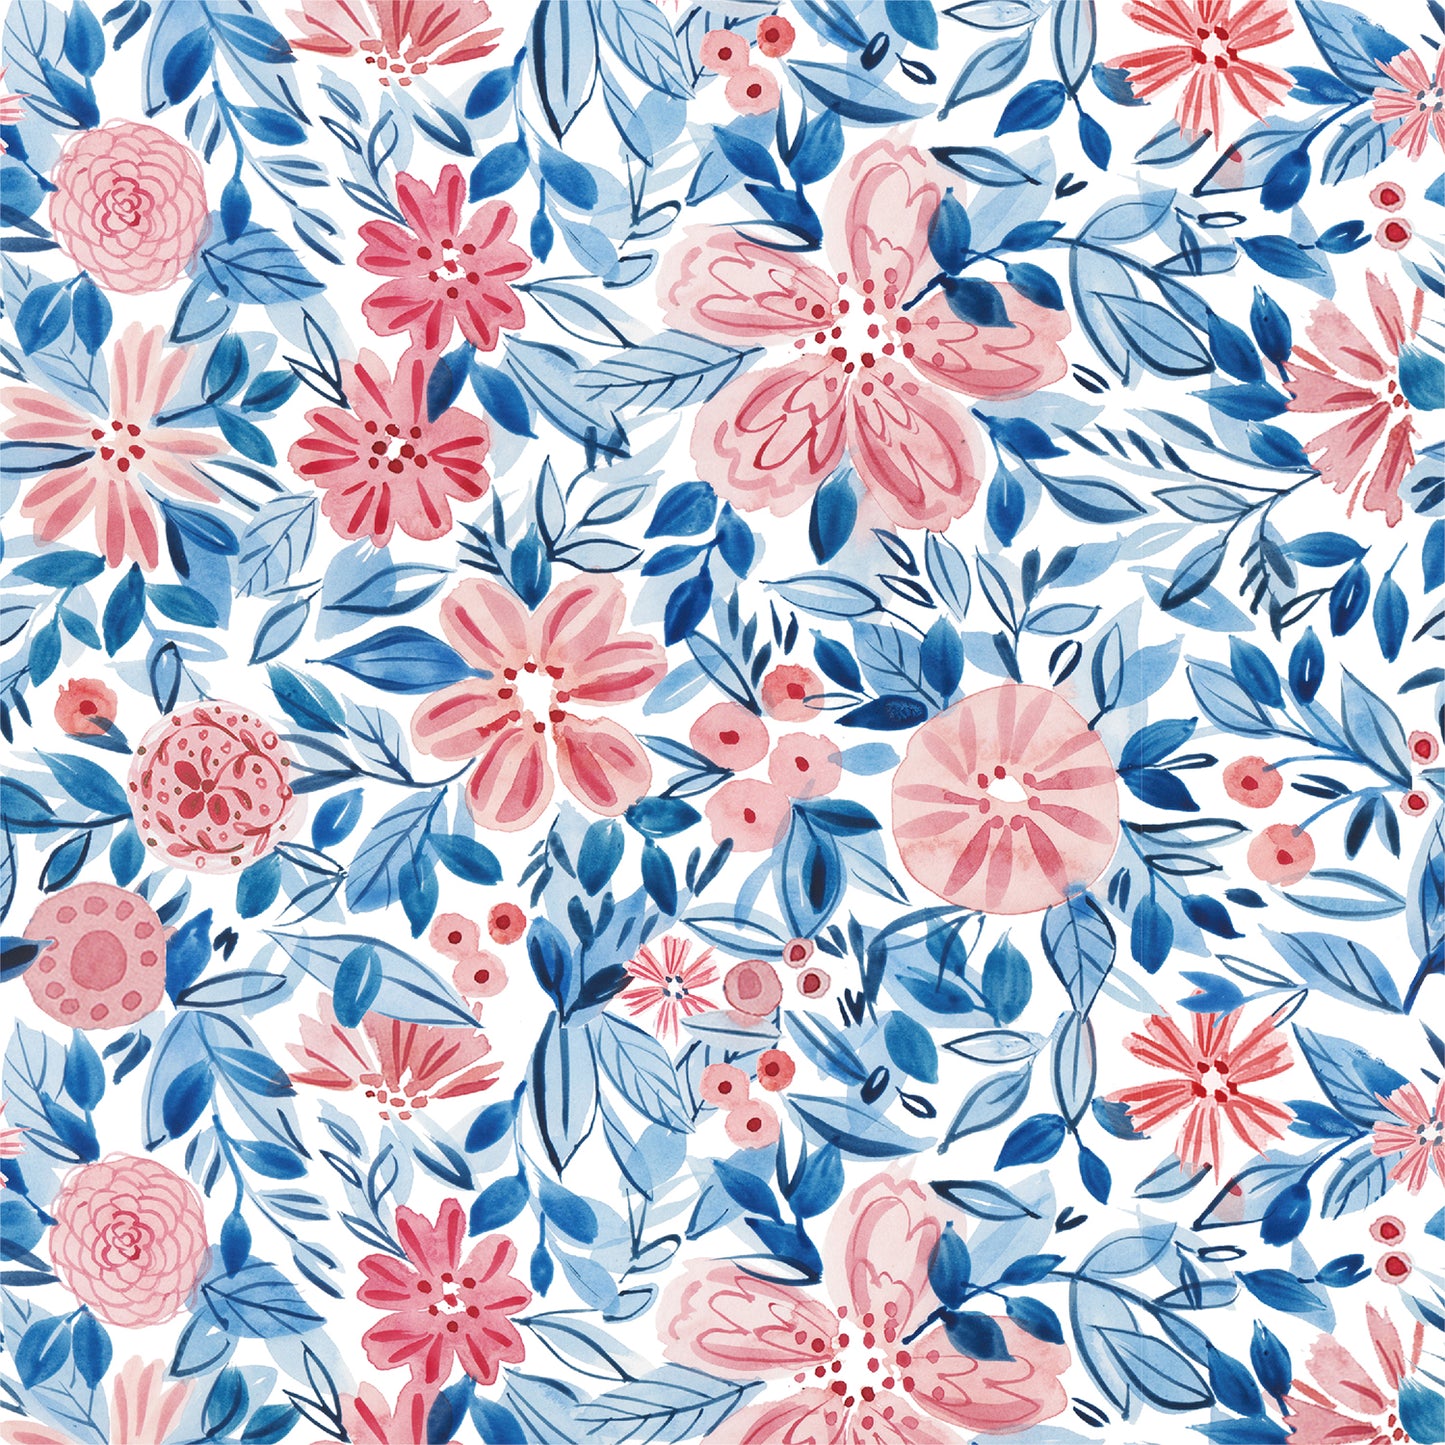 Blue Floral Flat Wrapping Paper Sheet Wholesale Wraphaholic